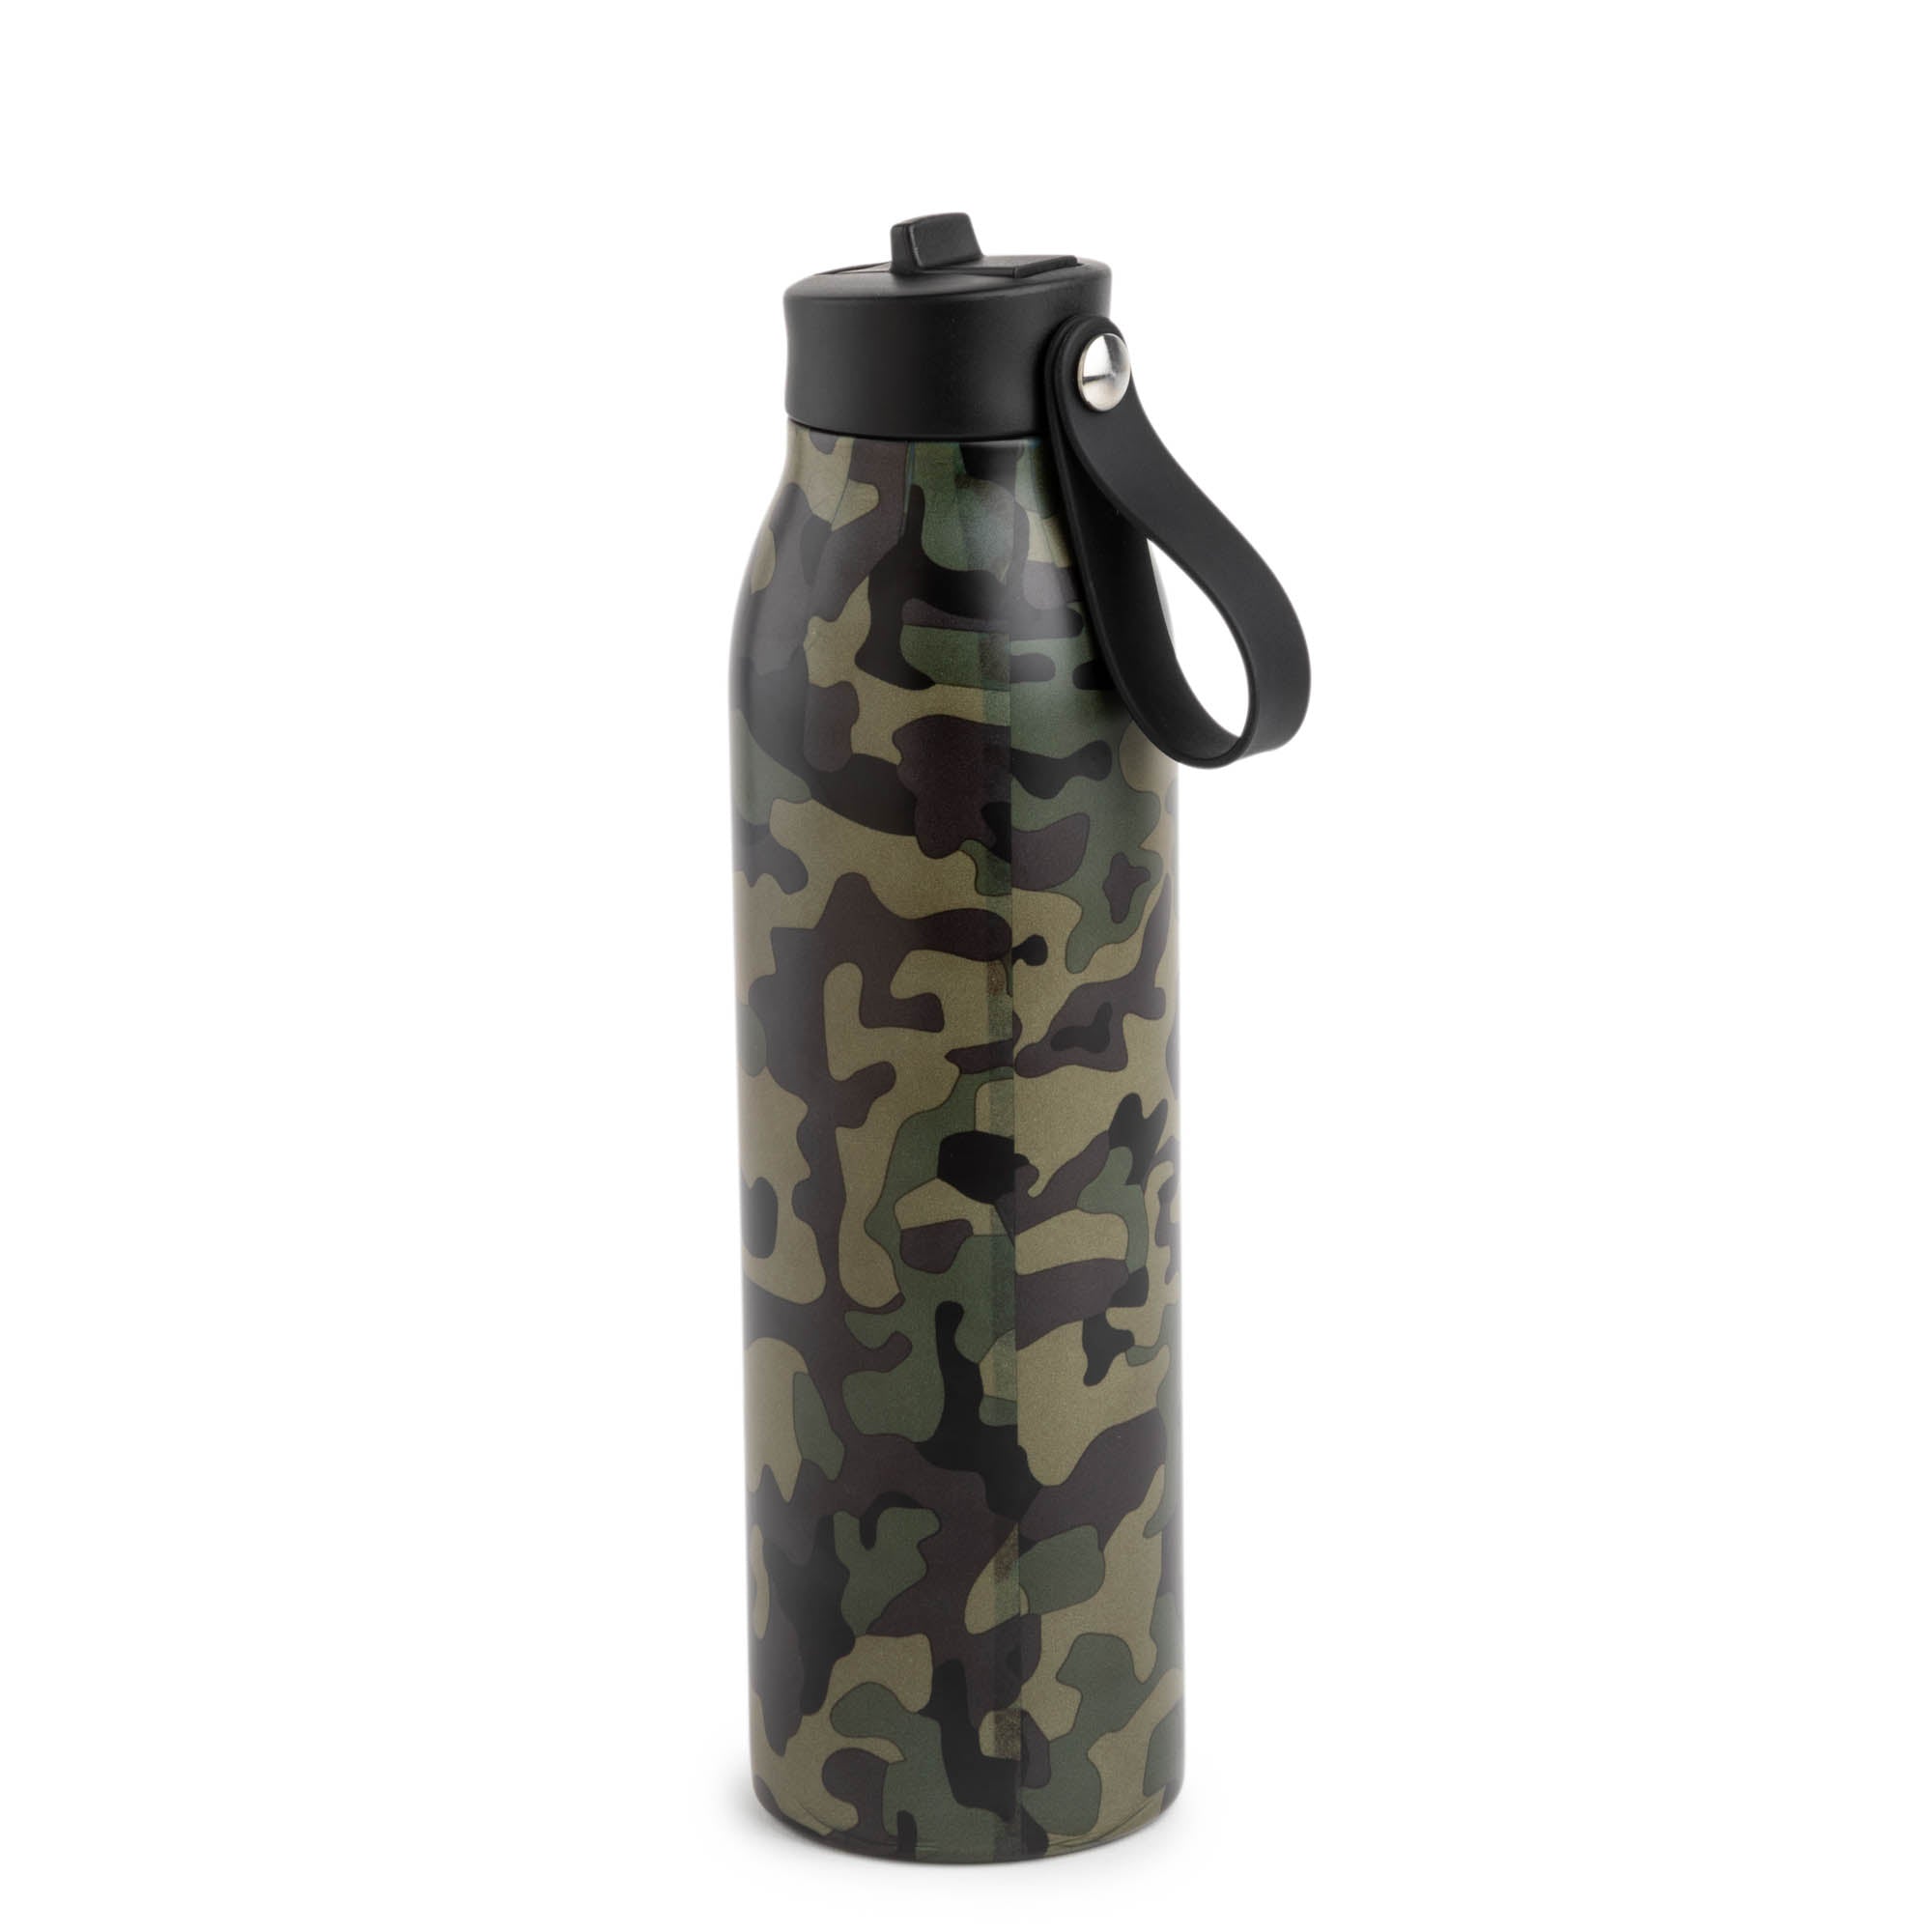 PURE Collection 16.9 oz. Water Bottle - Camouflage, Typhoon